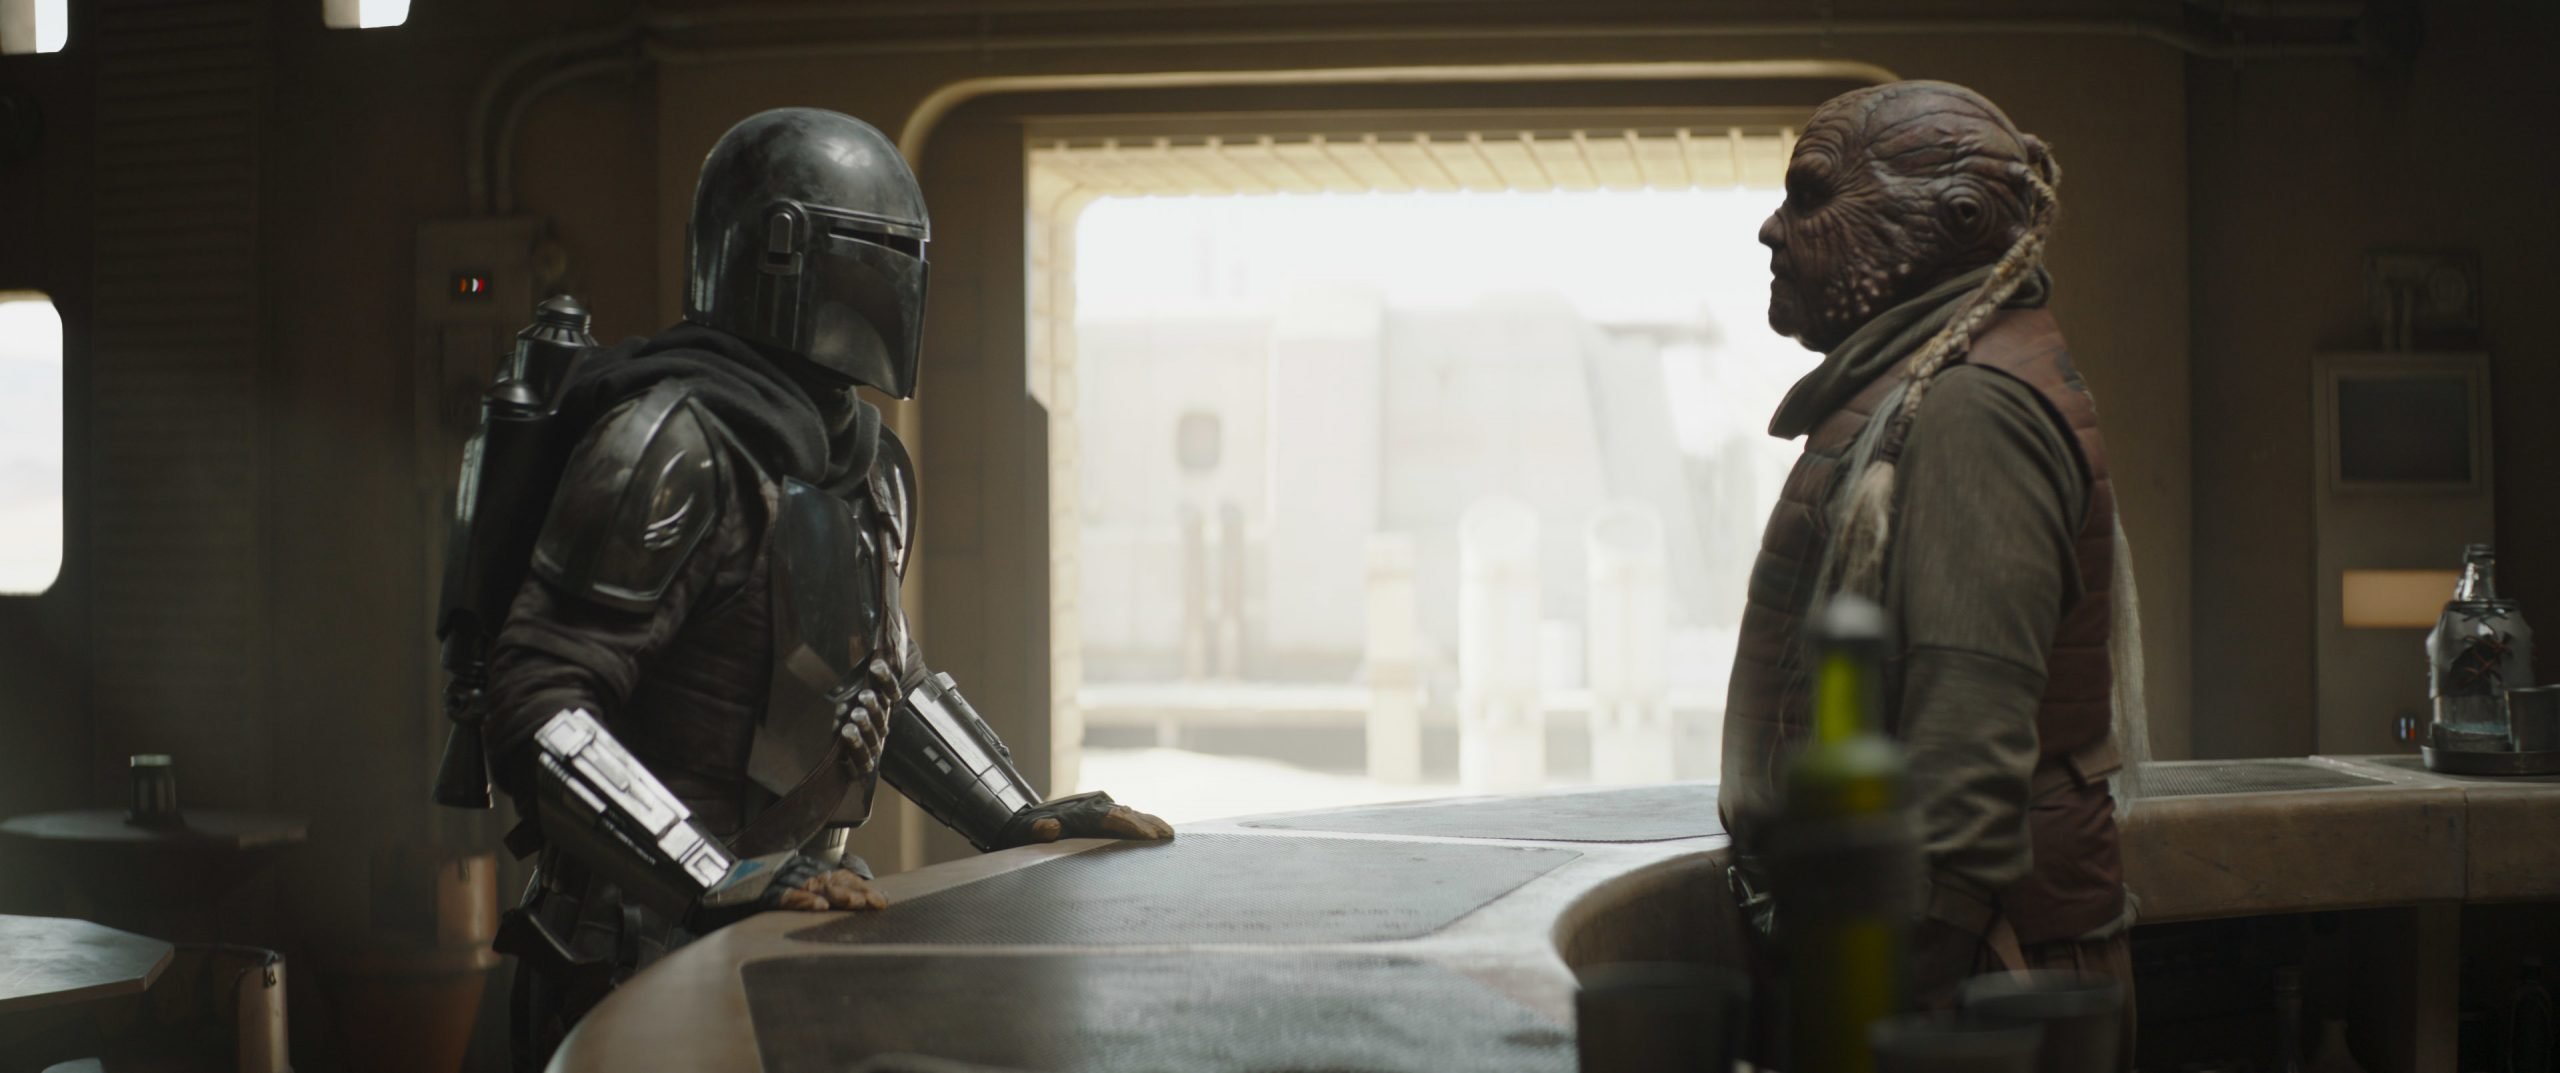 The Mandalorian (Pedro Pascal) and the Weequay bartender on Tatooine.